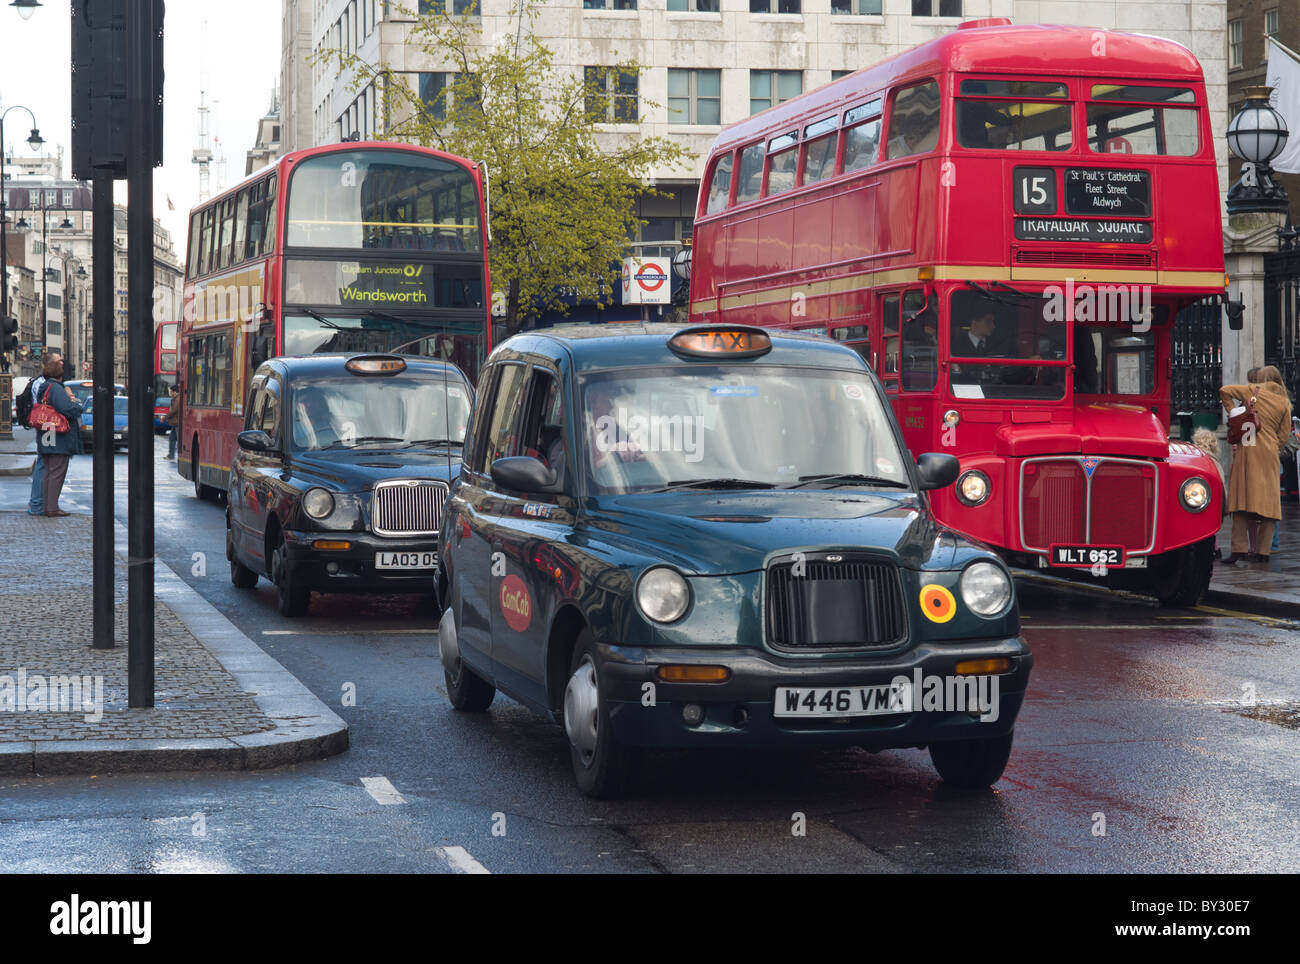 A Routemaster double-decker bus operates on heritage route 15 in traffic in front of Charing Cross Station in London, England, UK. Stock Photo